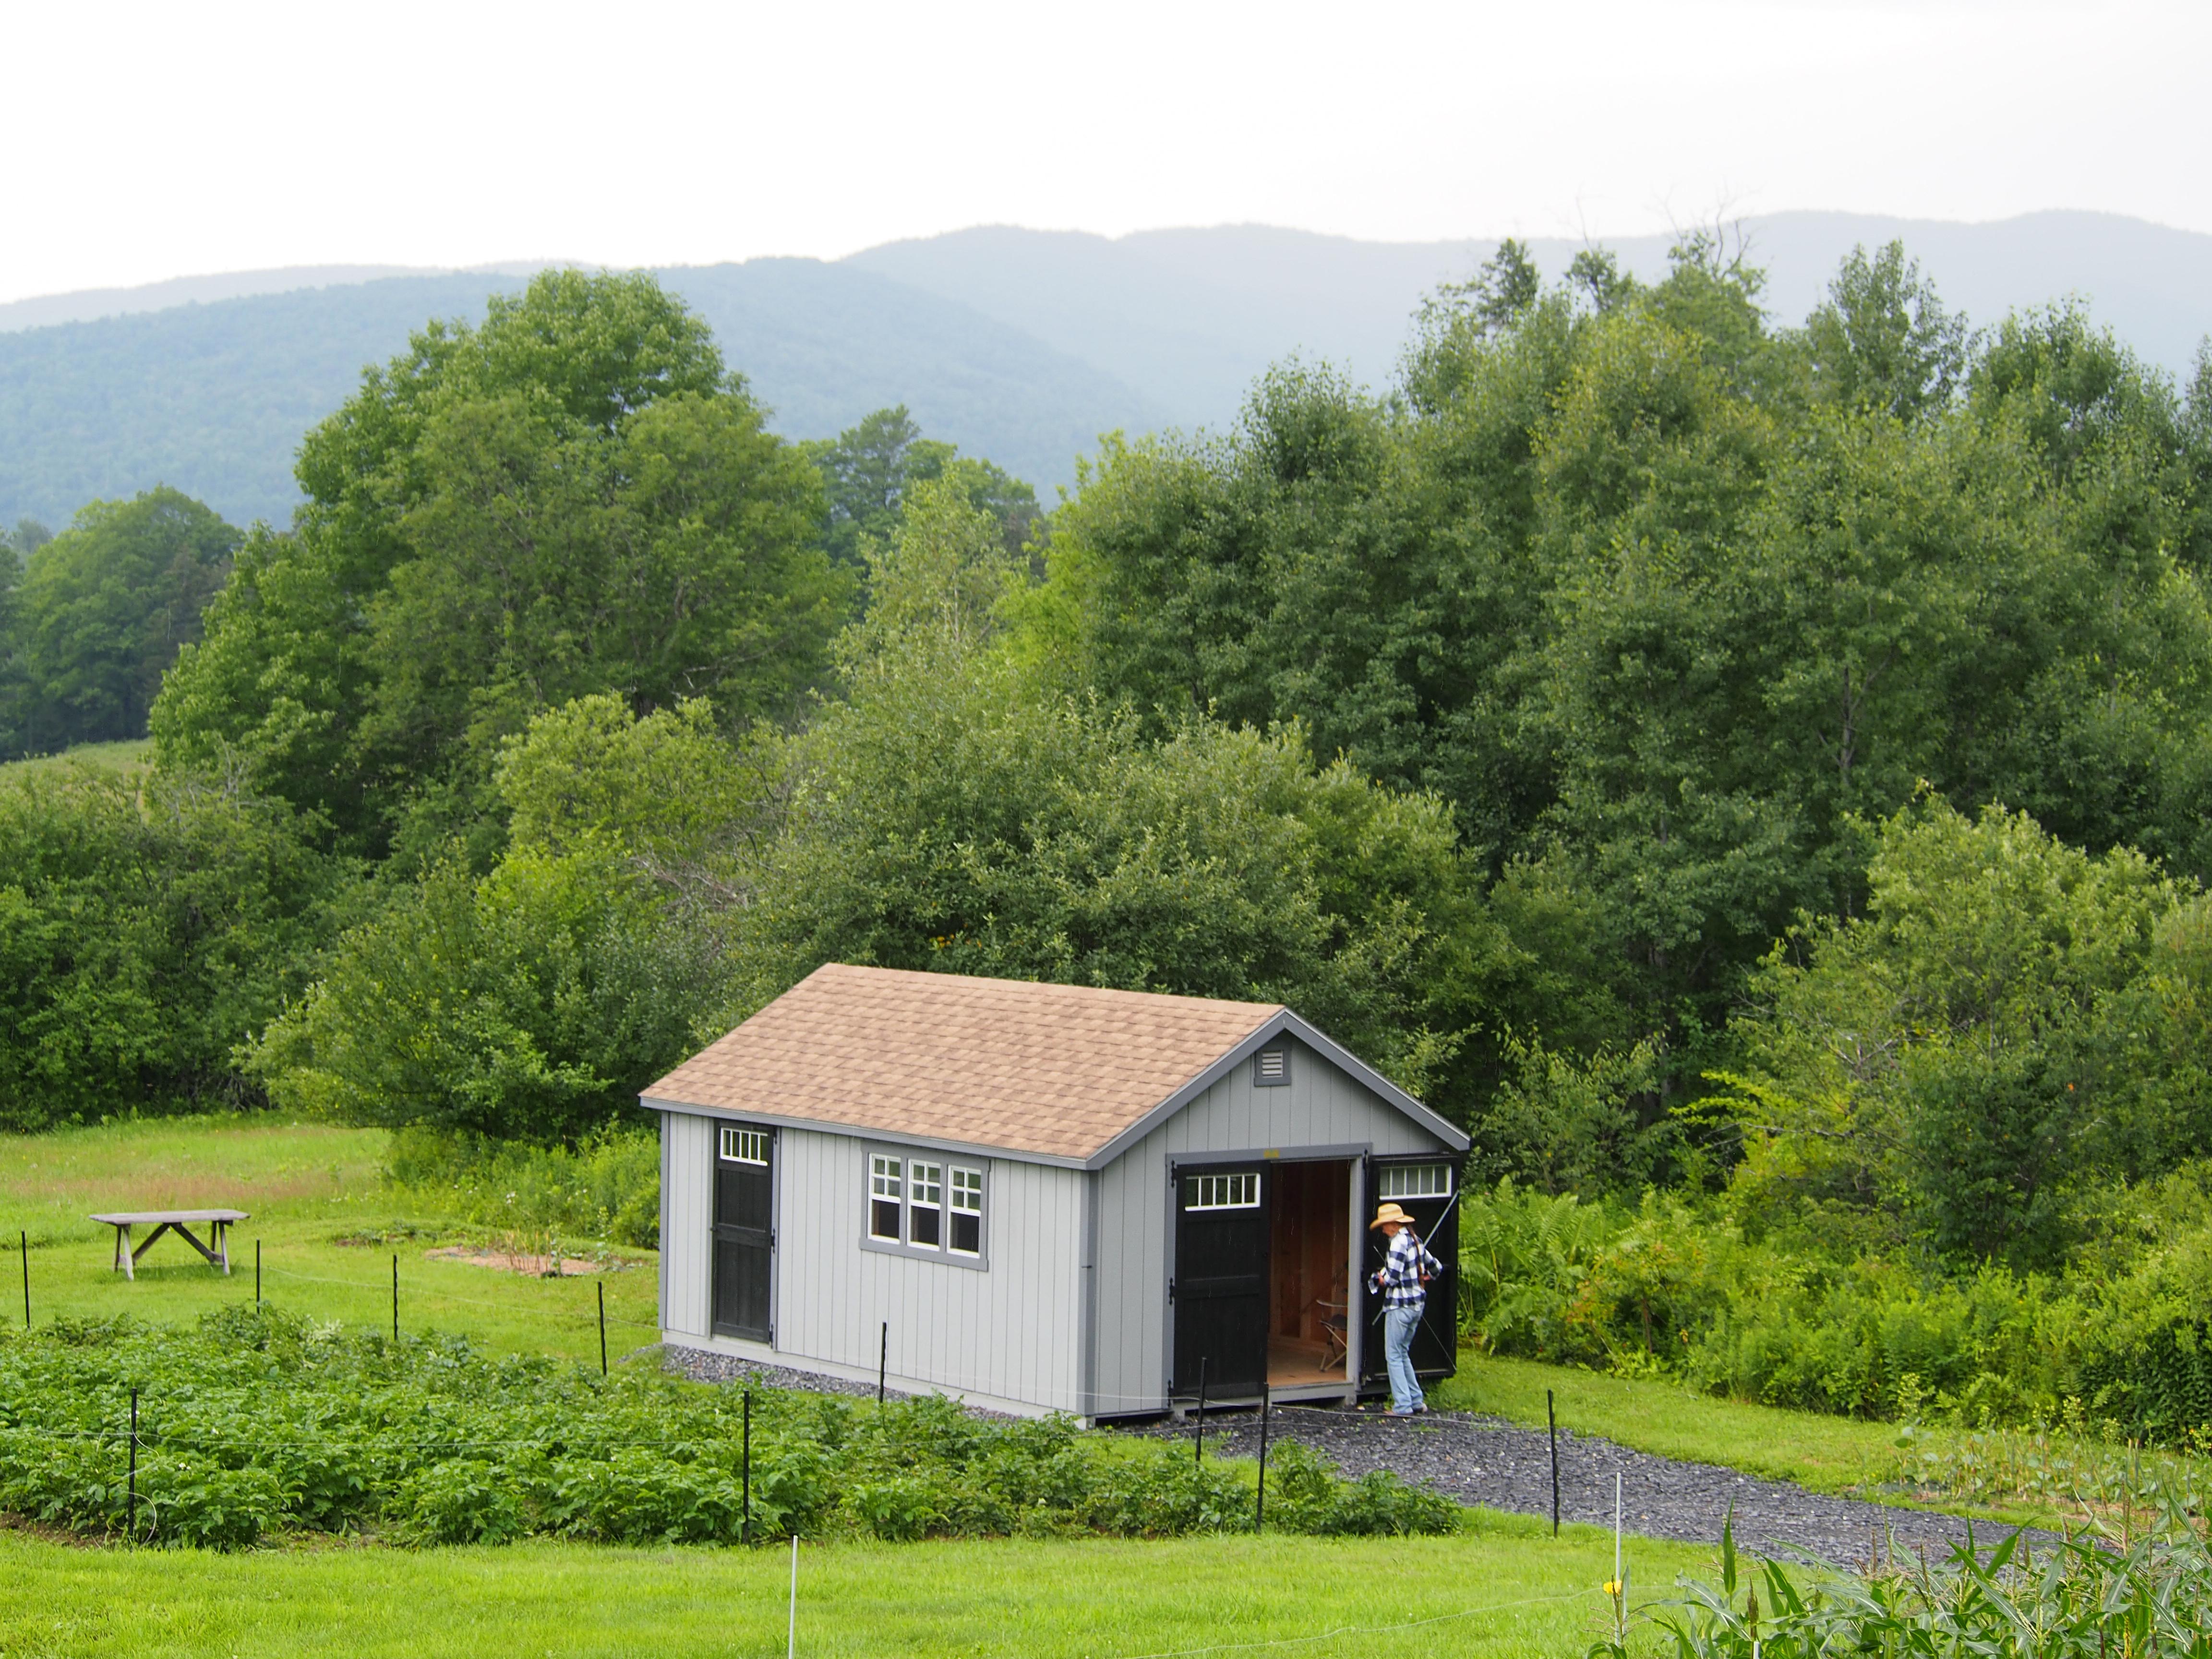 A farmer is seen from afar, approaching a small outbuilding. 